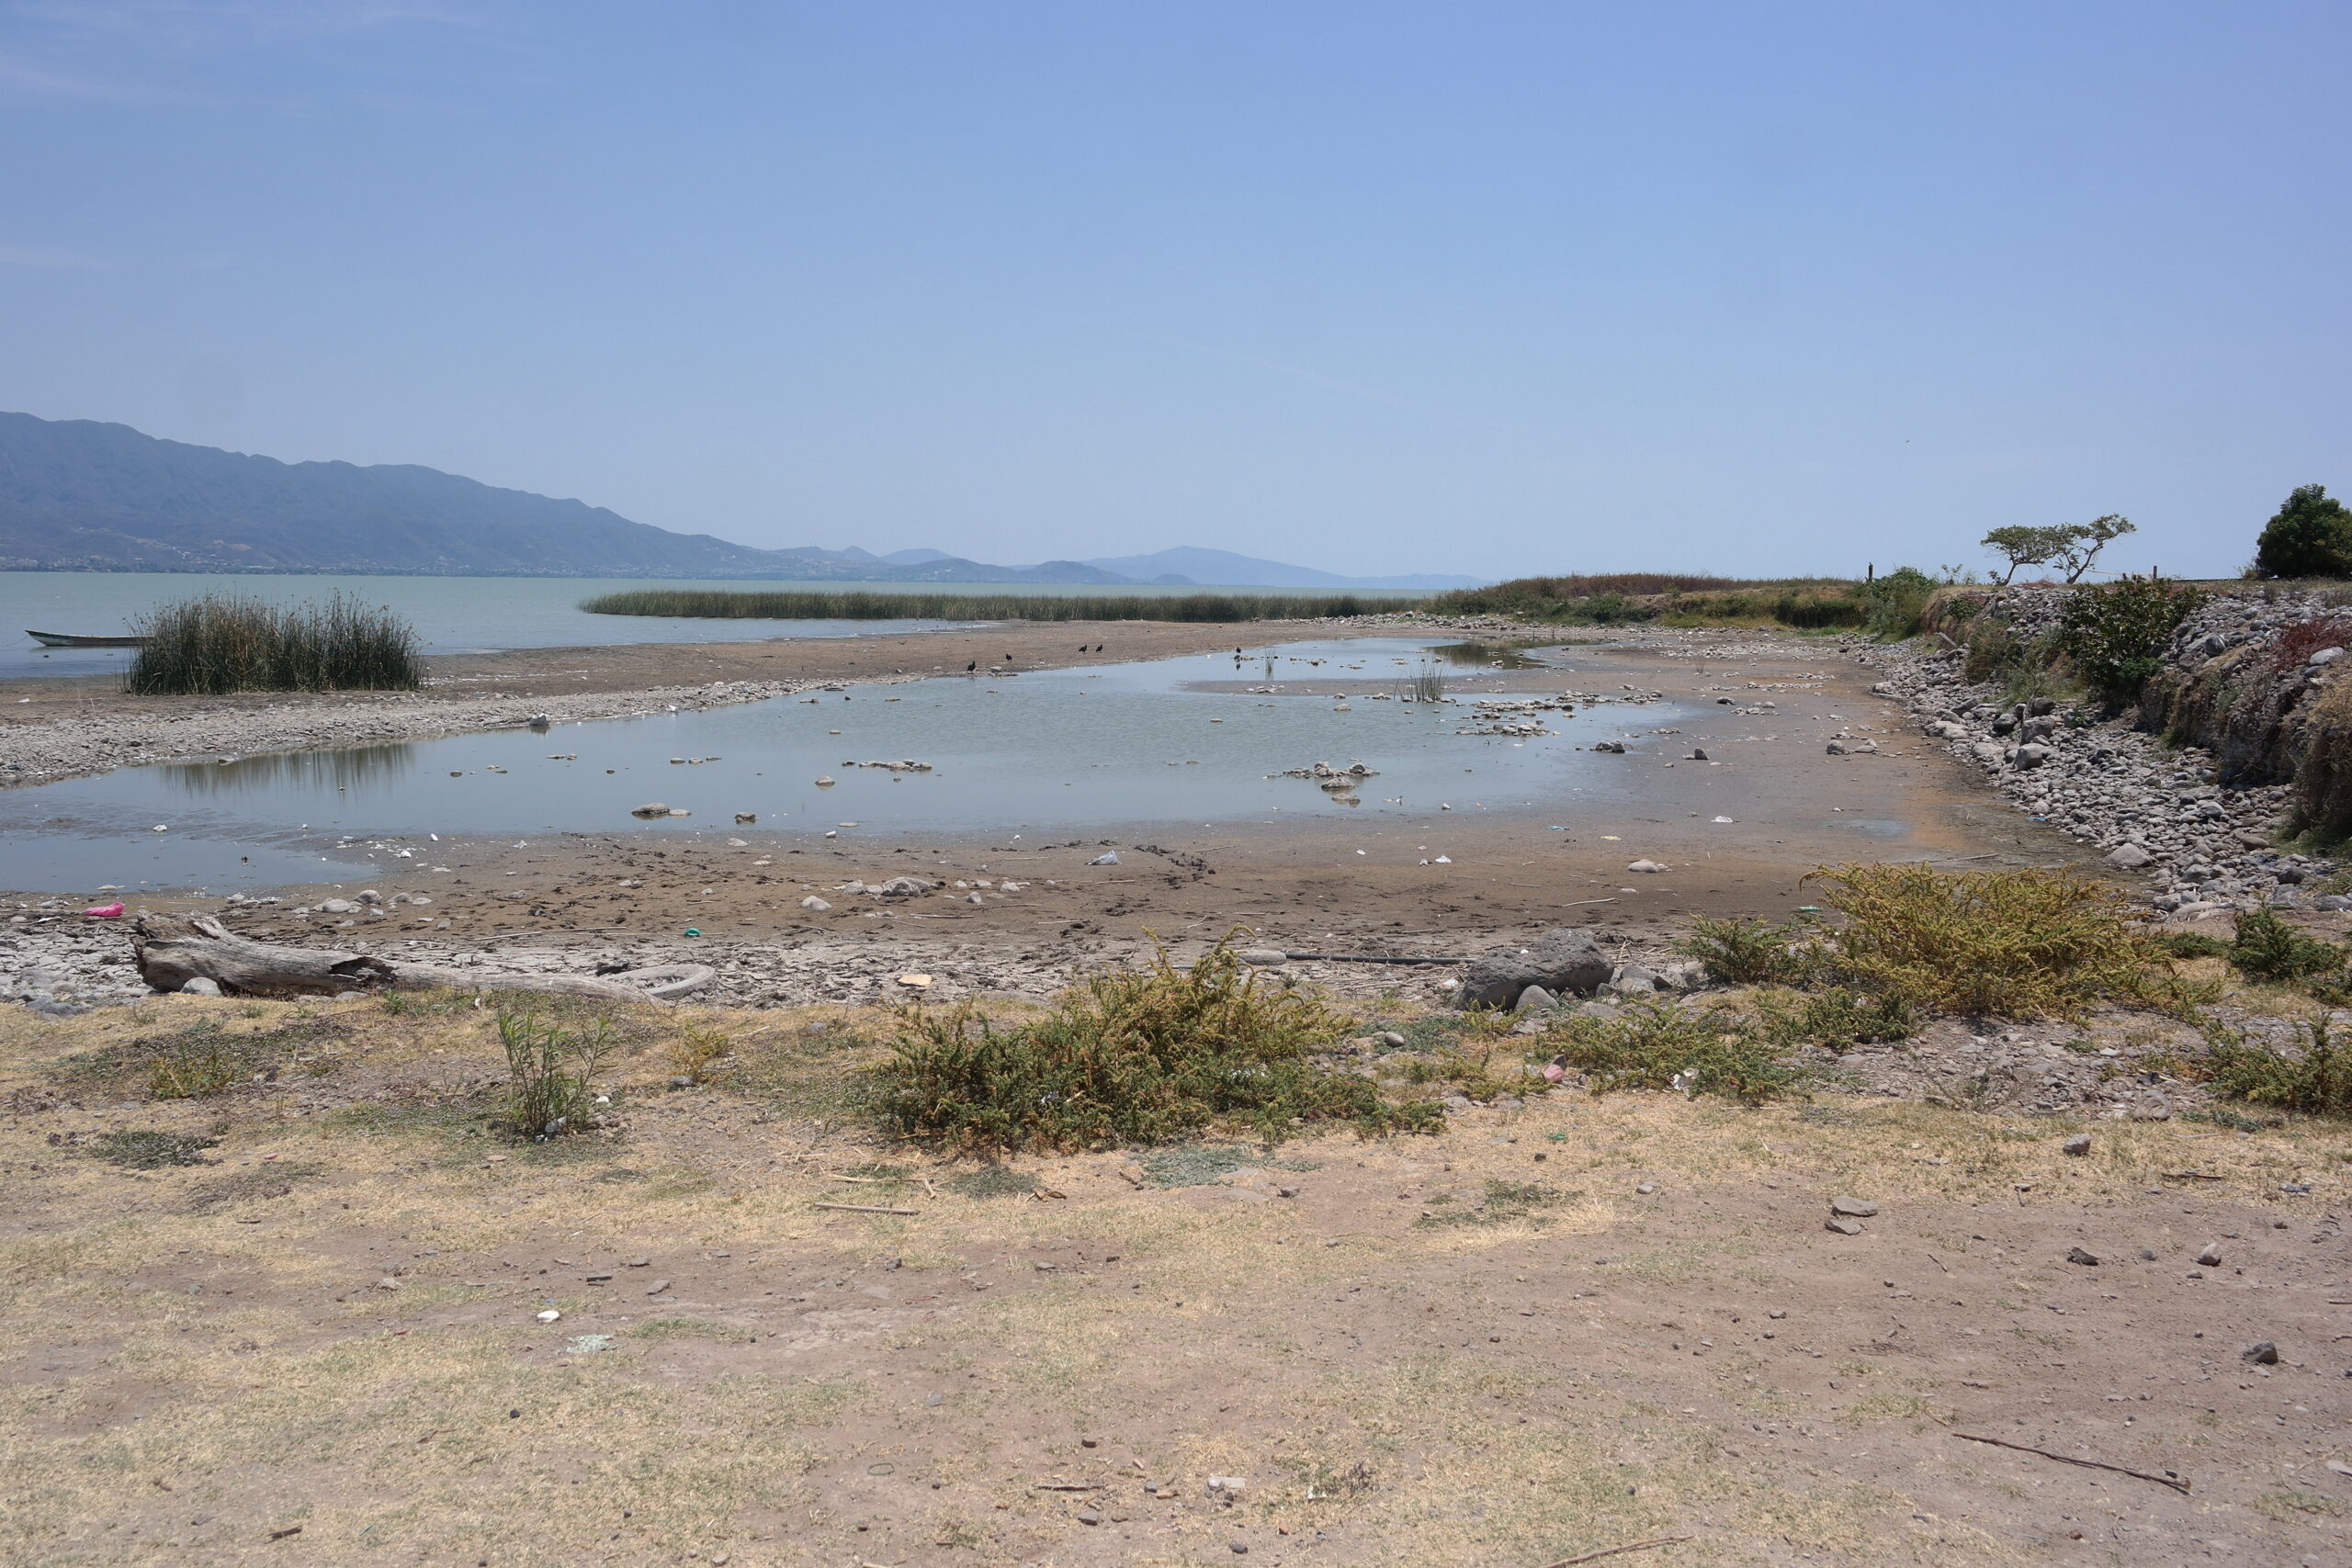 Drought reveals damage to lake due to dredging in San Cristóbal